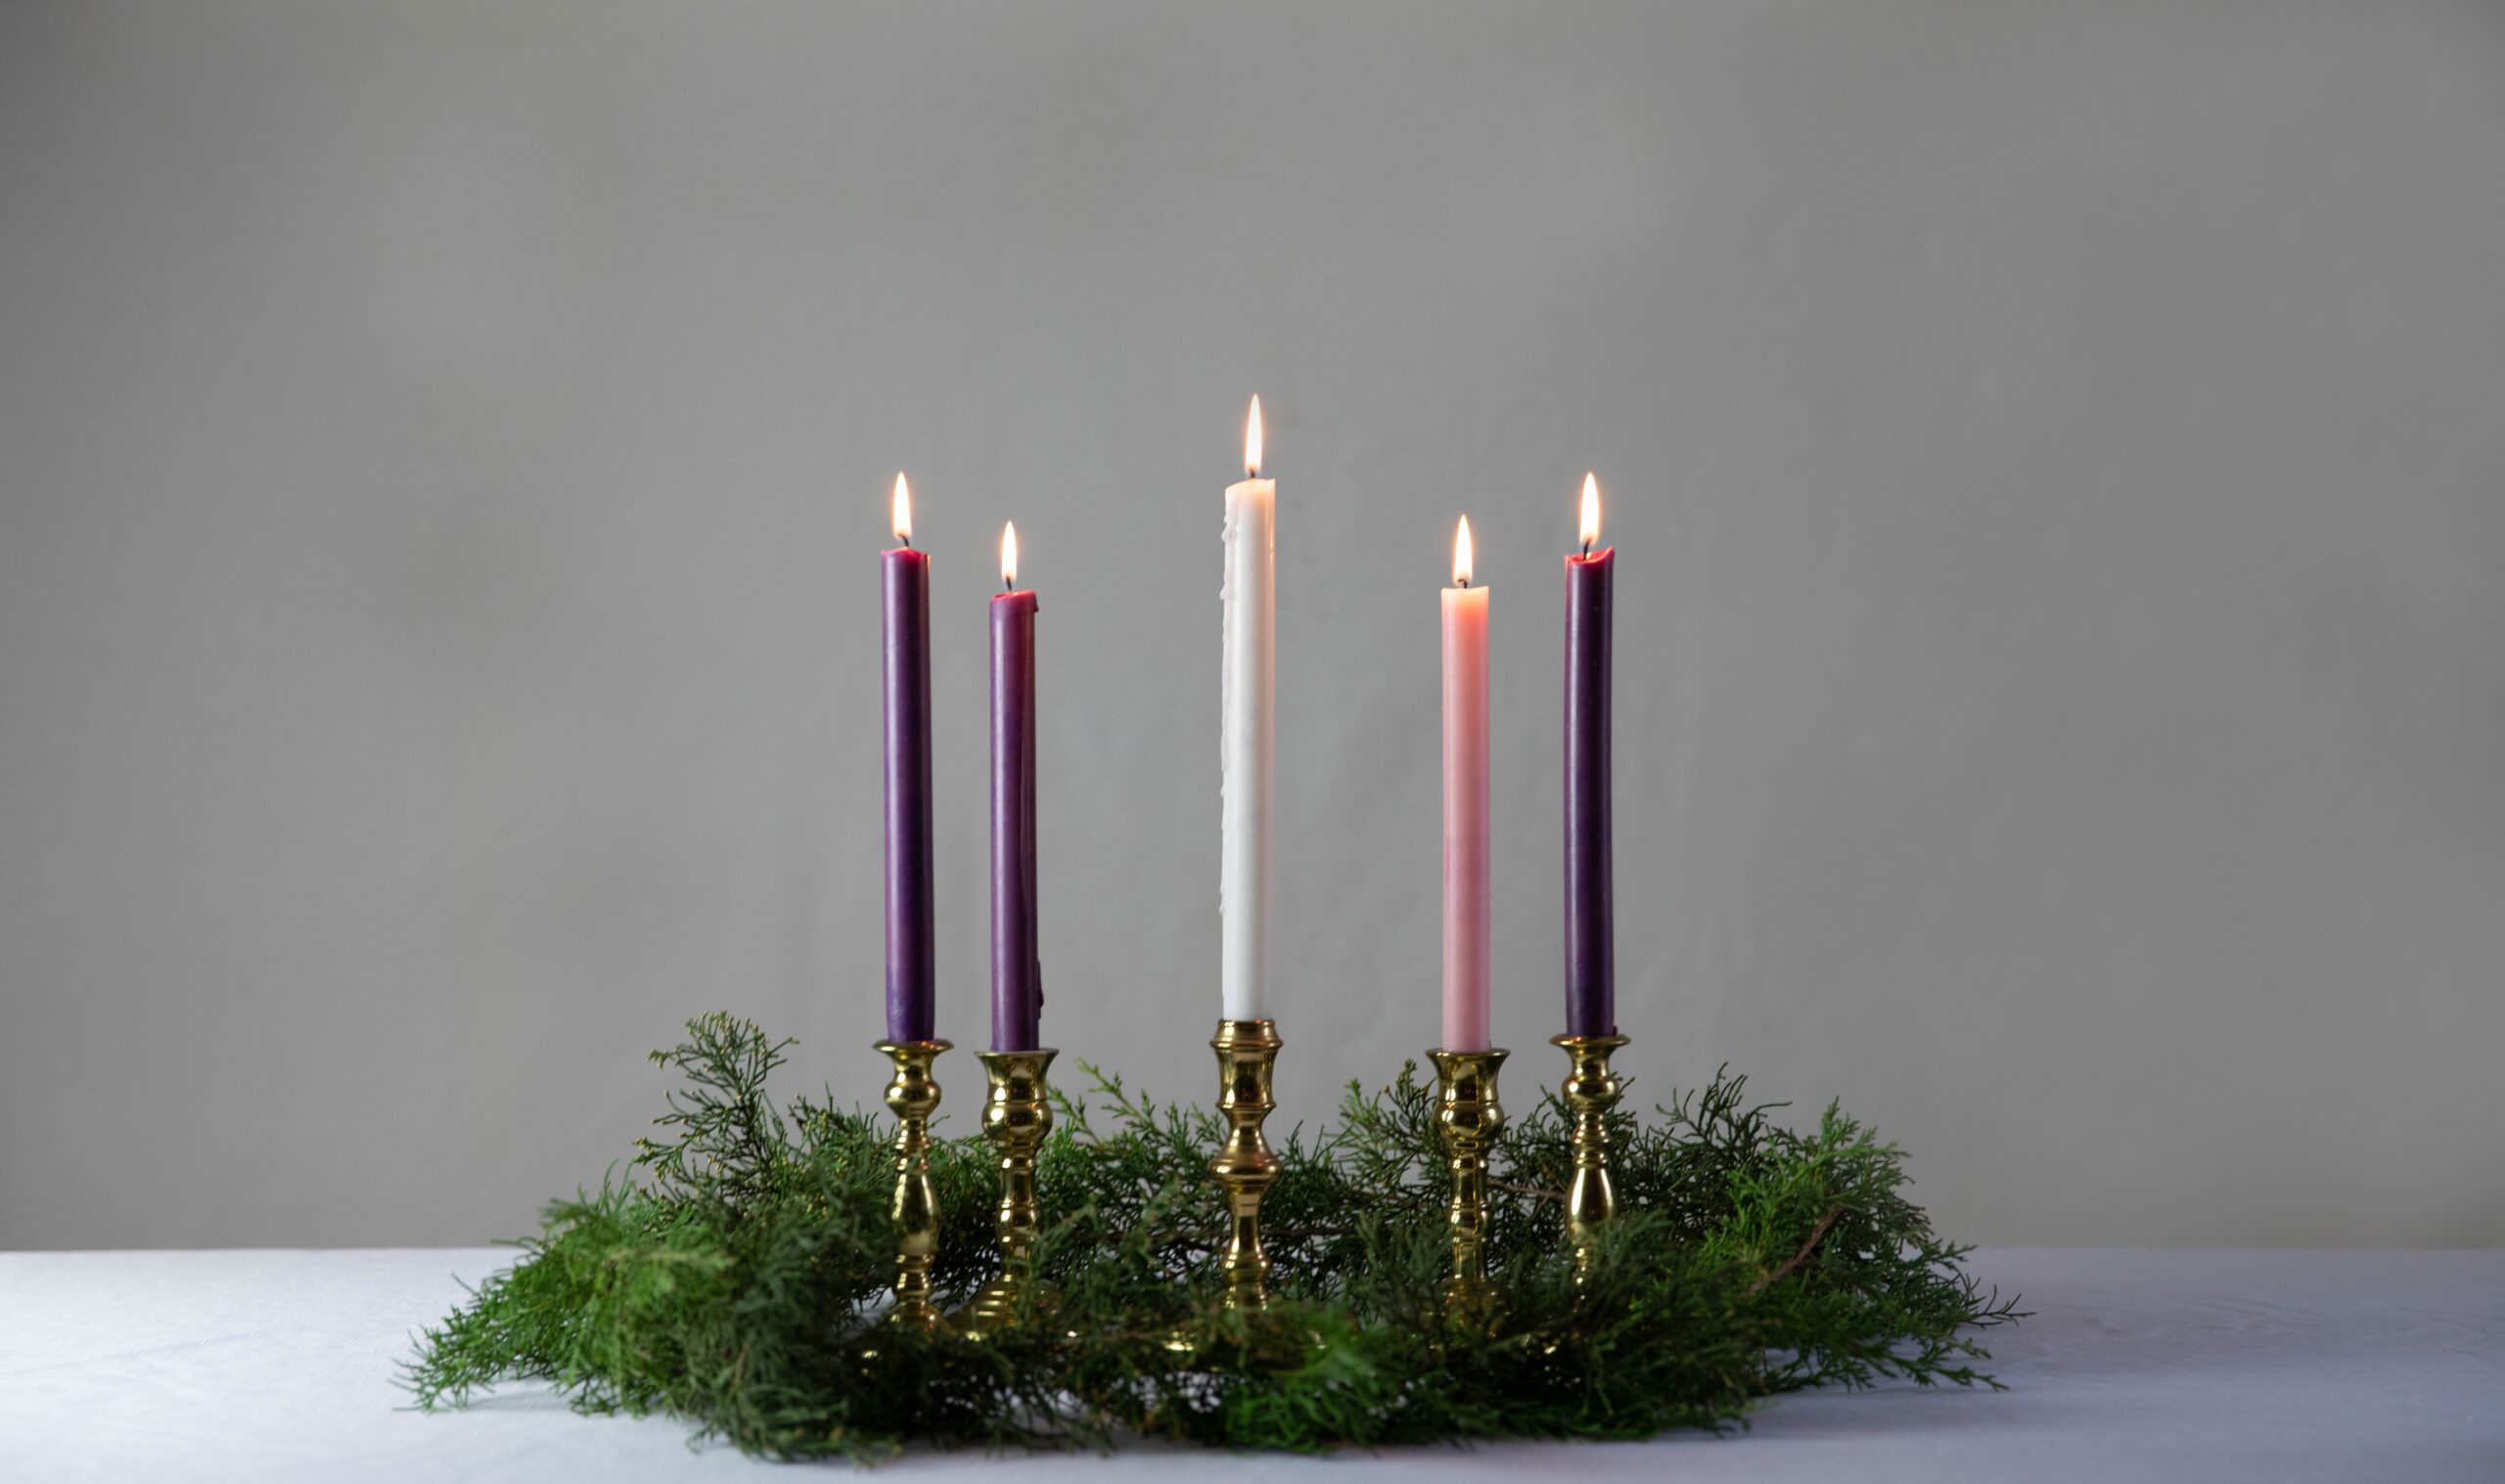 Bring your Advent wreath to Mass for a blessing